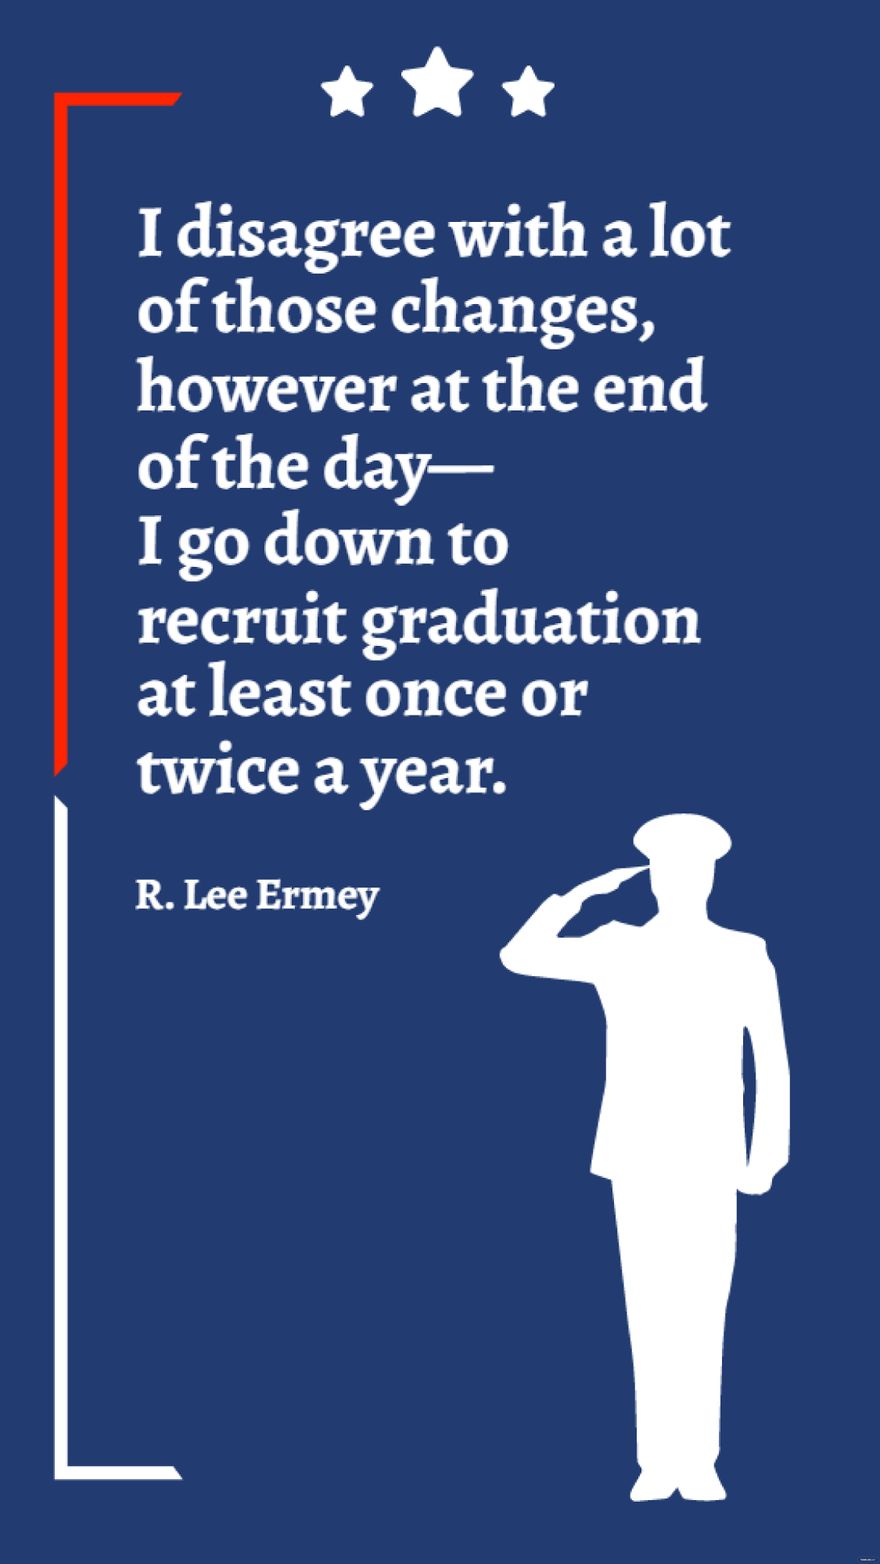 R. Lee Ermey - I disagree with a lot of those changes, however at the end of the day - I go down to recruit graduation at least once or twice a year.